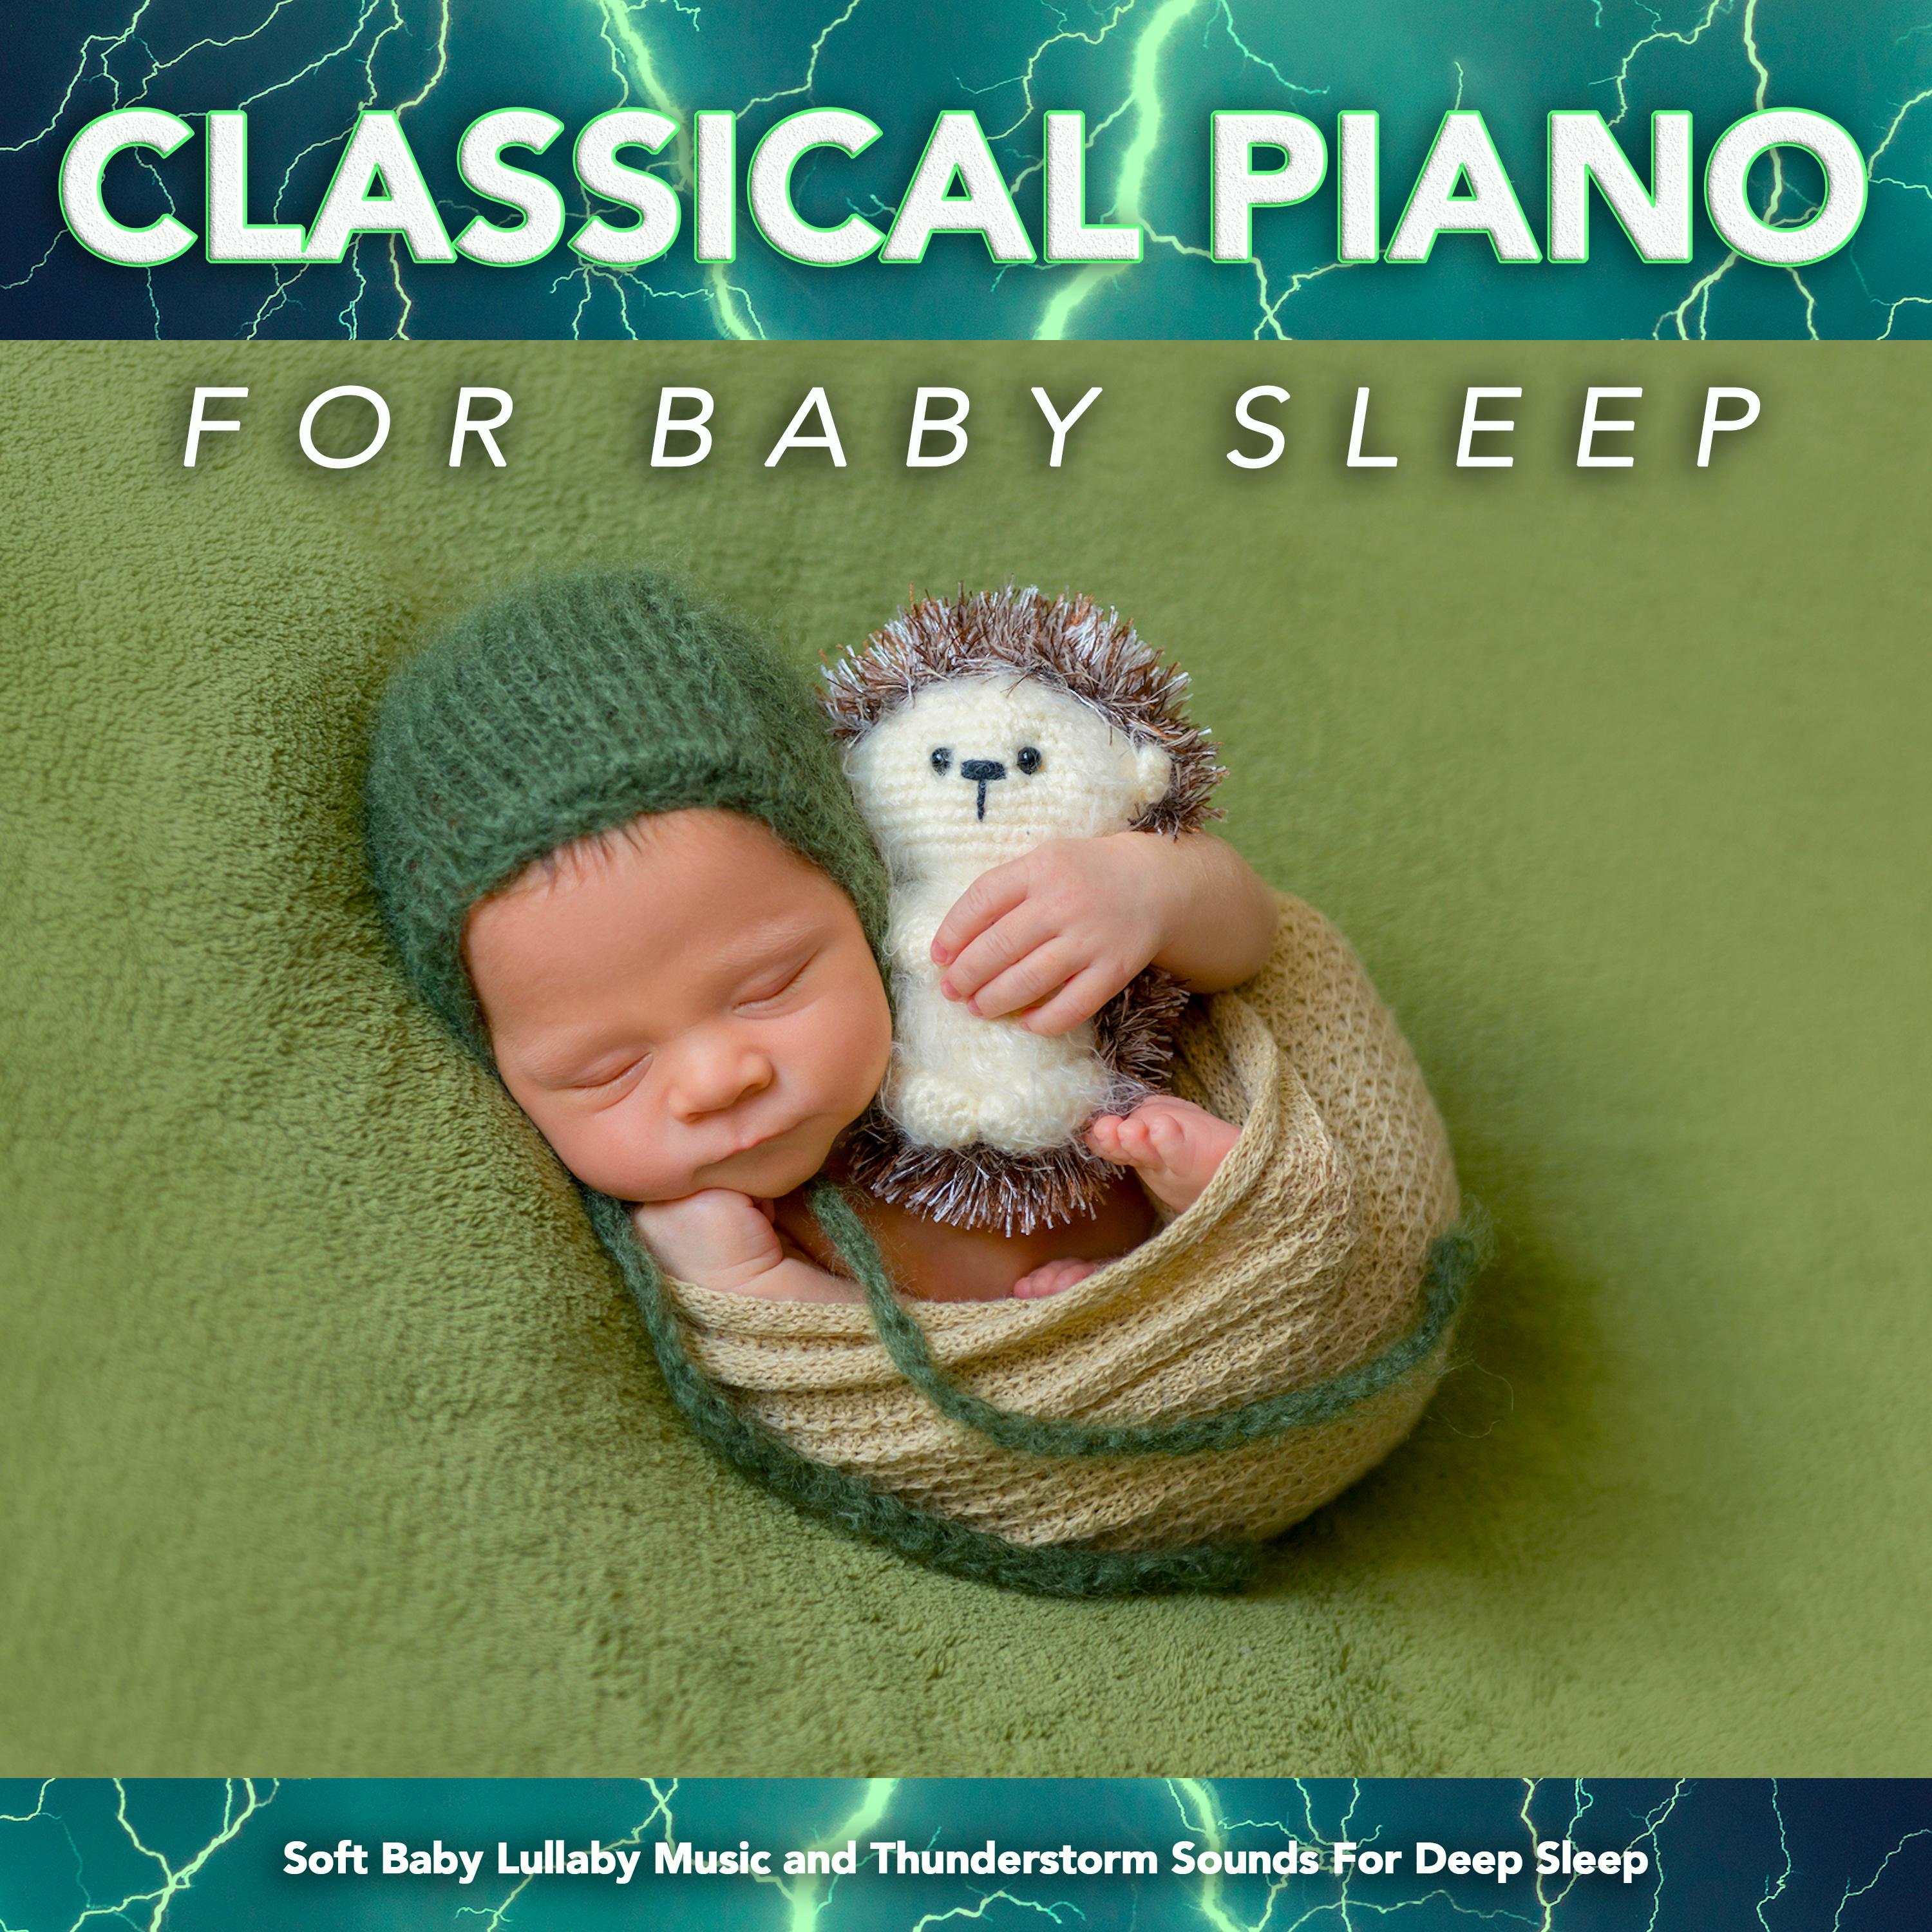 Arabesque - Debussy - Soft Baby Lullaby Music - Thunderstorm Sounds - Classical Piano for Baby Sleep